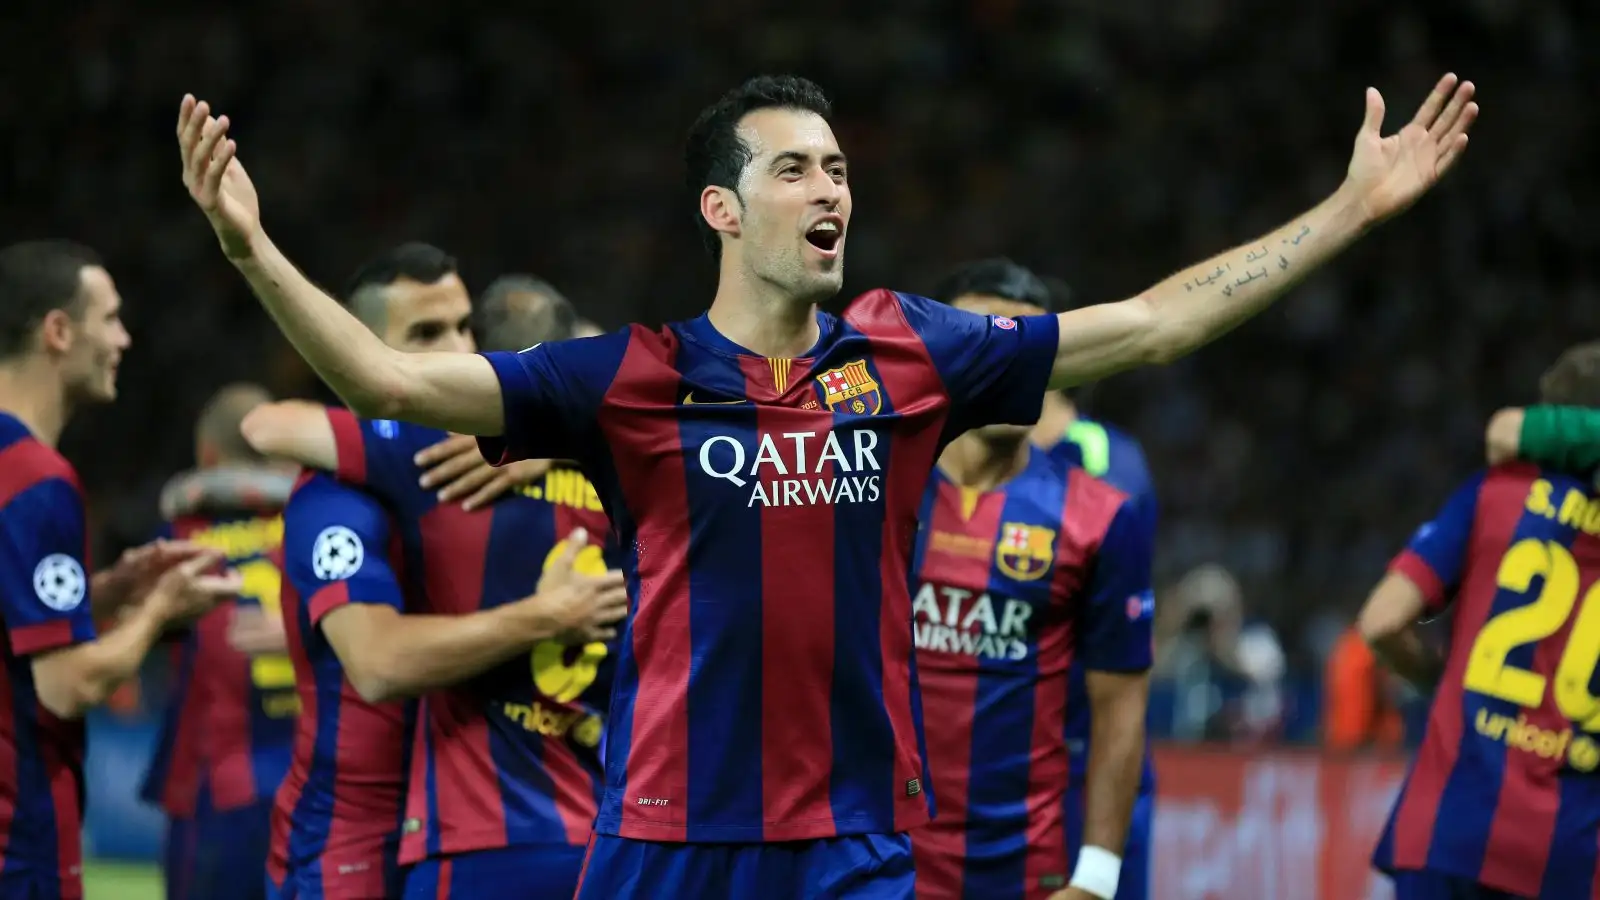 13 legends honour Sergio Busquets: ‘He could play in velvet slippers’